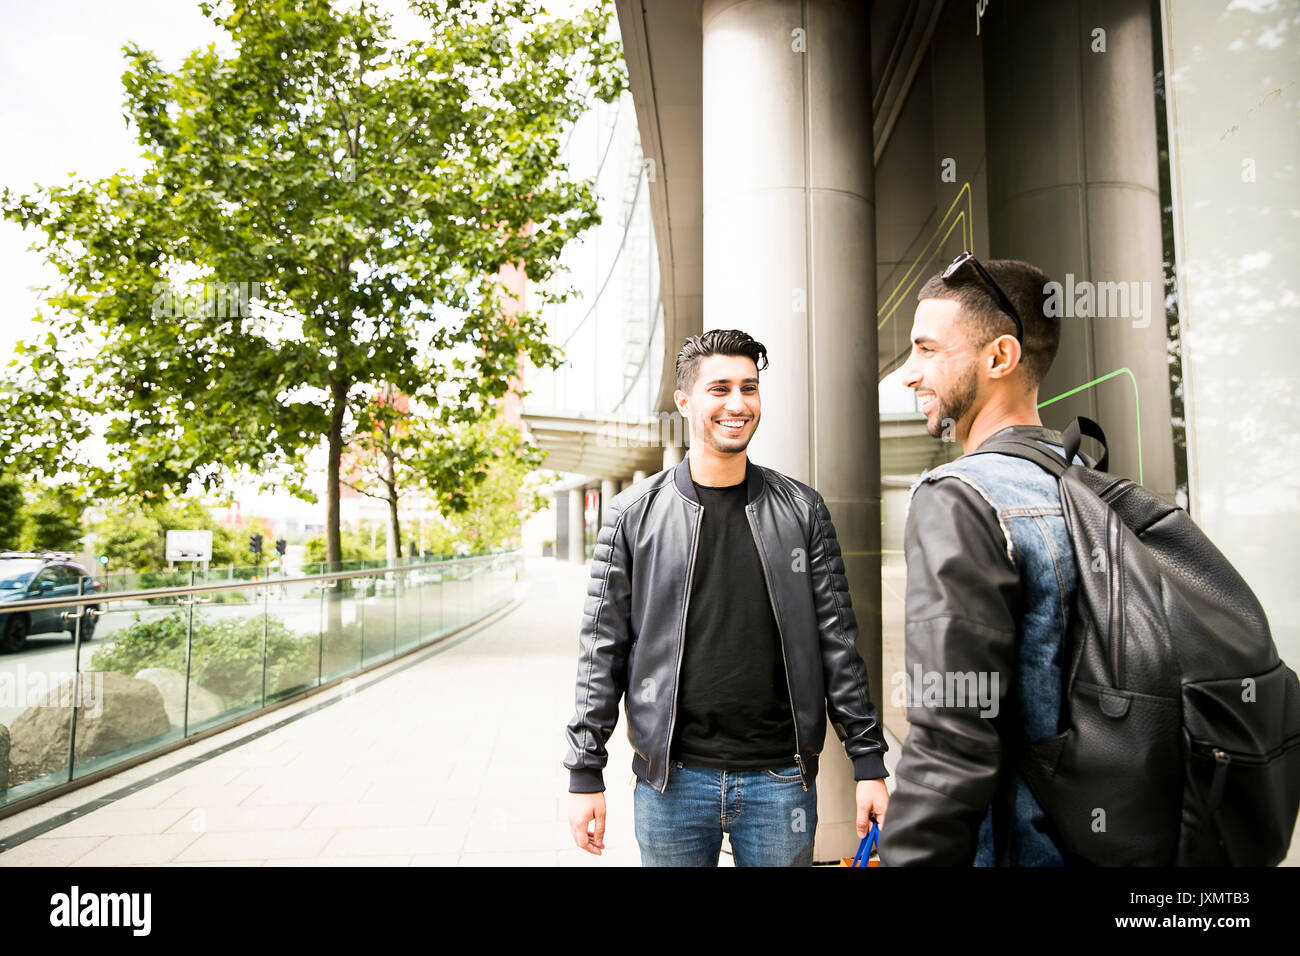 Two young men, standing in street, smiling Stock Photo